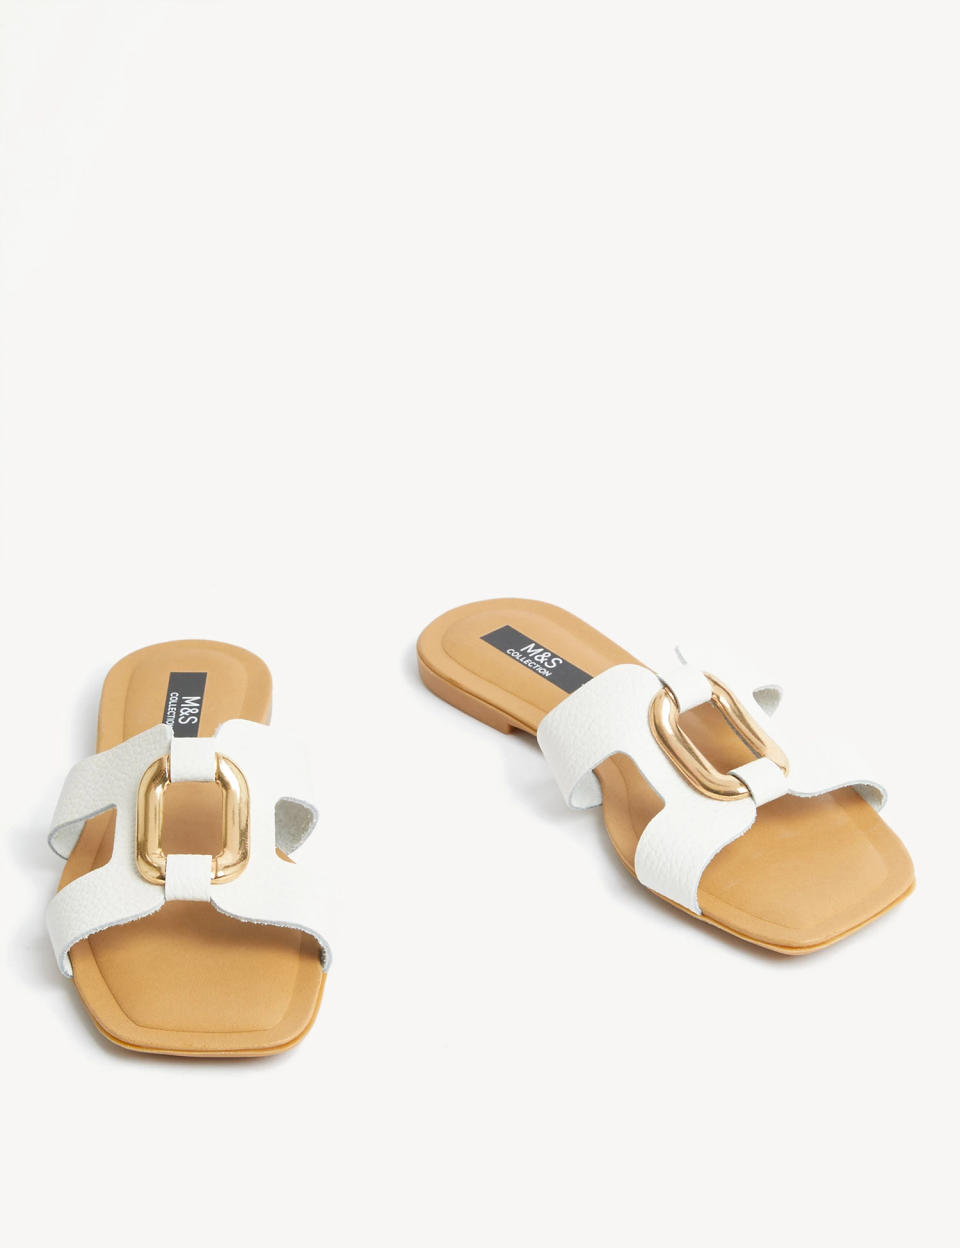 These are the chicest sliders we've seen on the high street. (M&S)